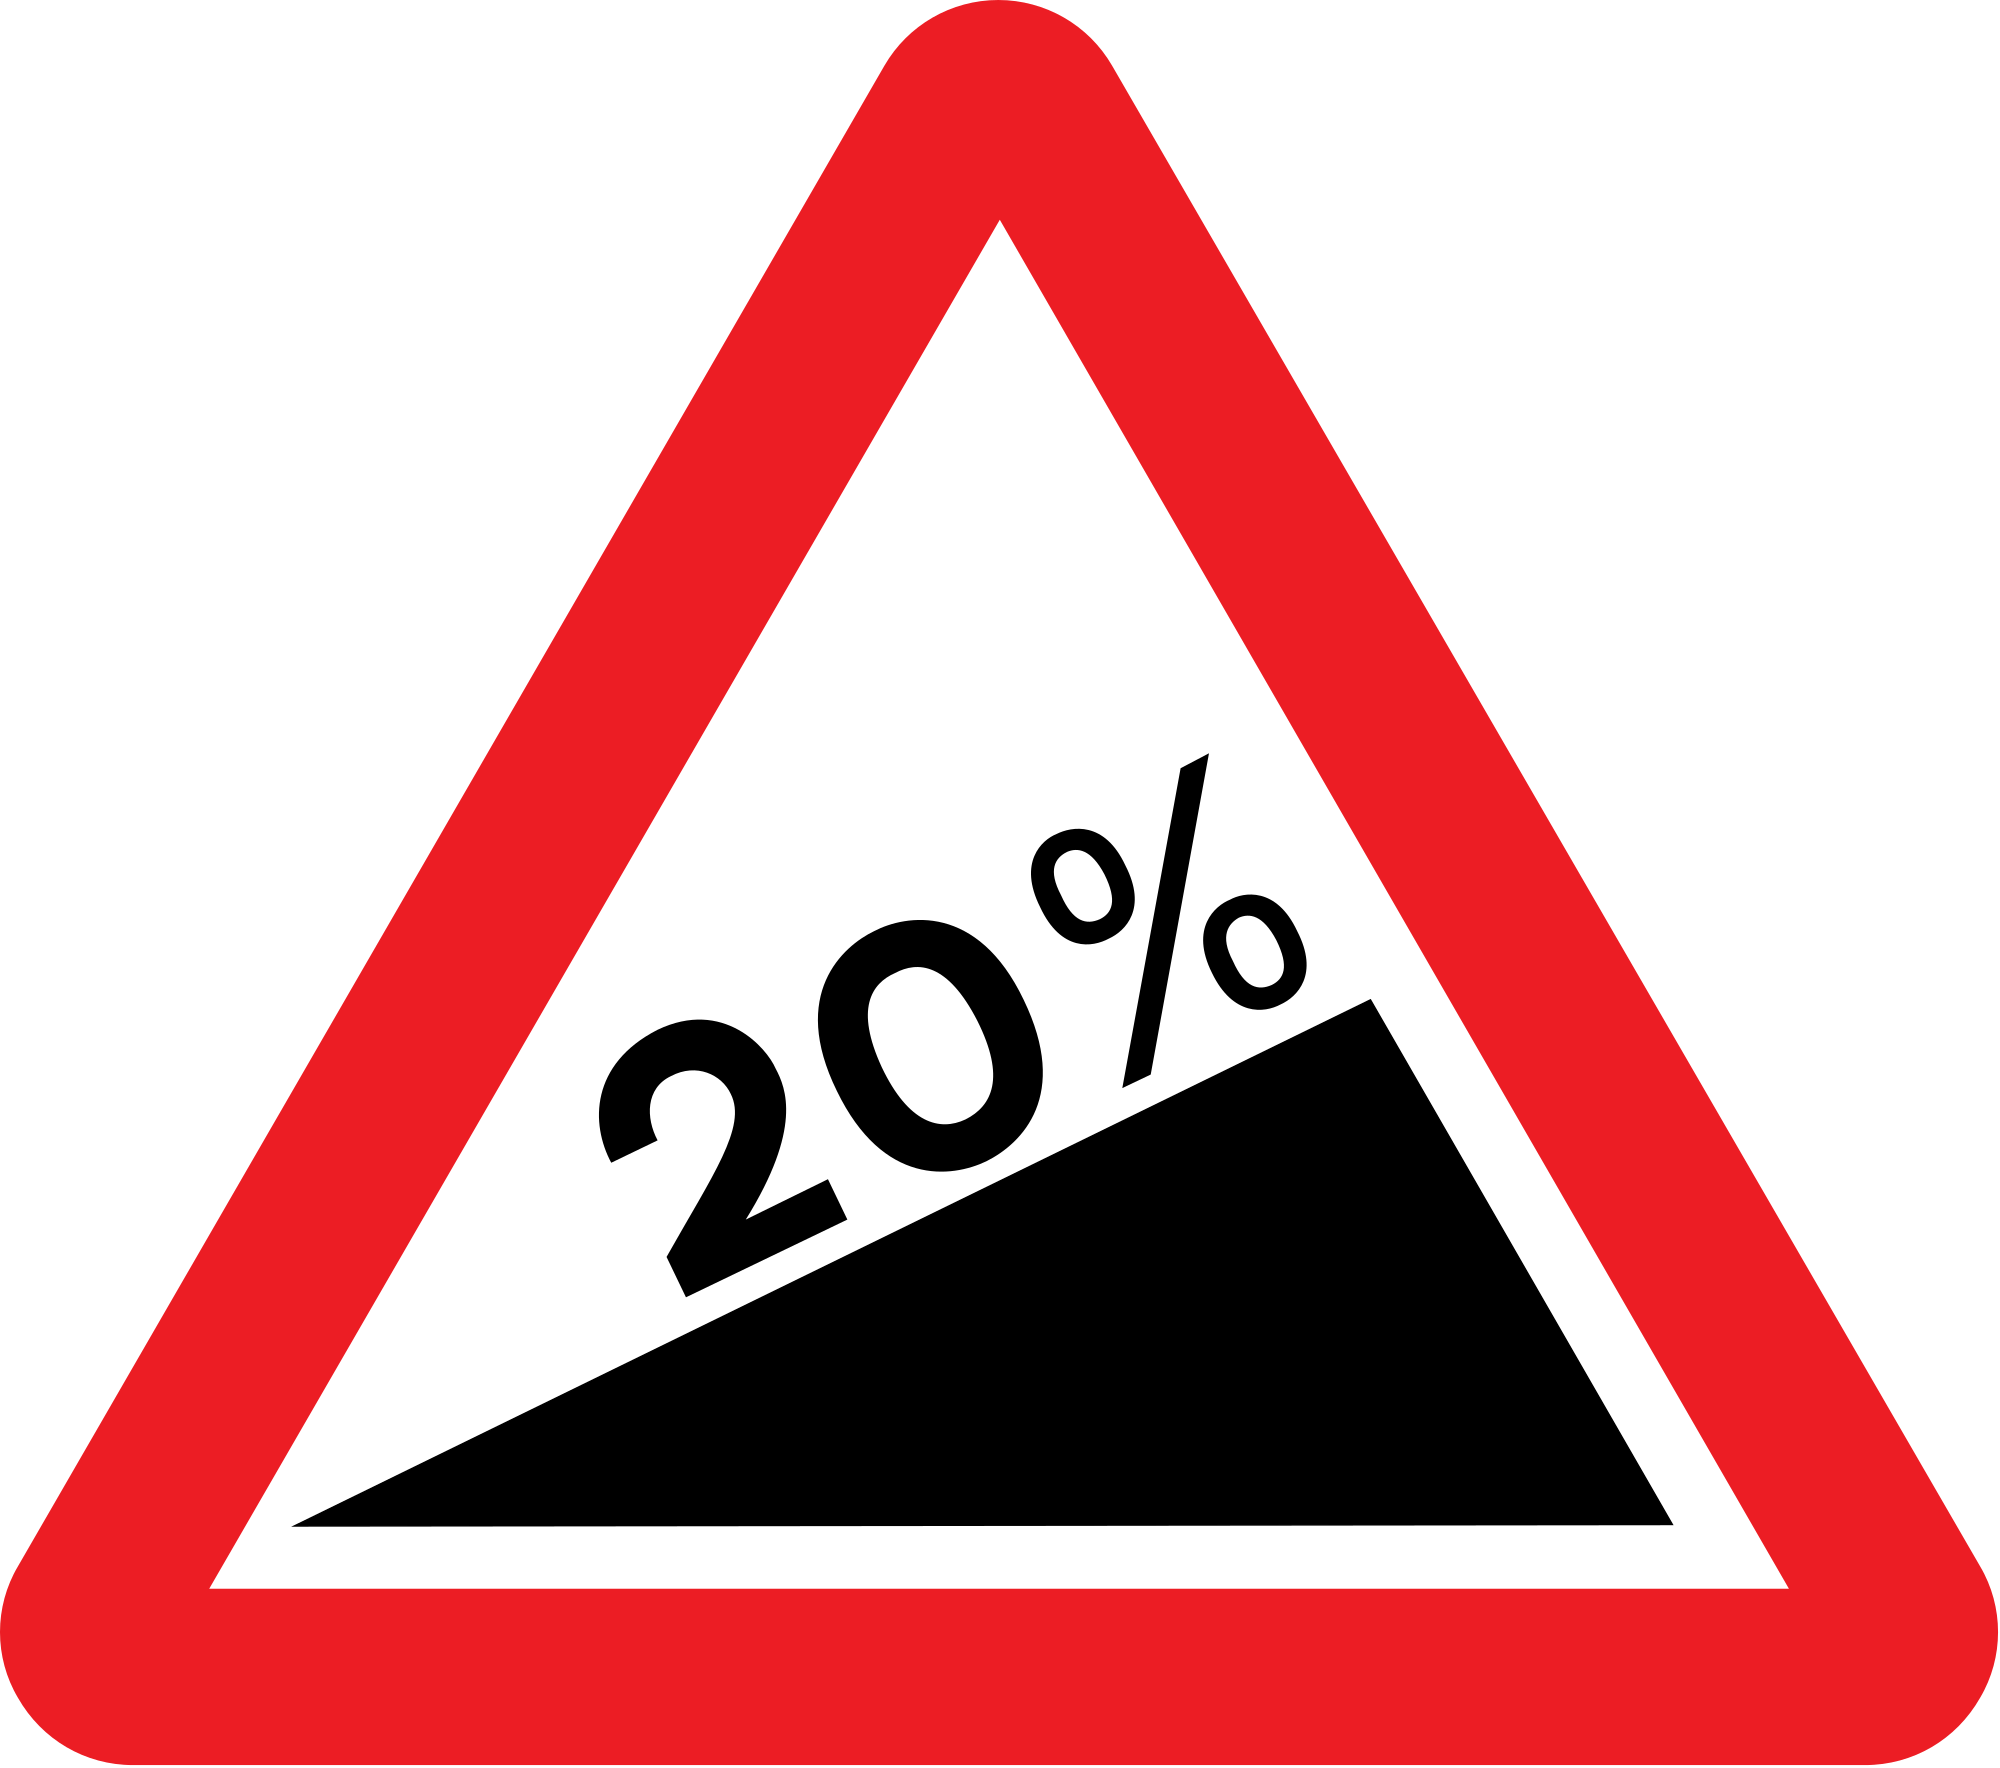 273 × 240 Pixels - Traffic Signs Cycle Crossing (2000x1768)